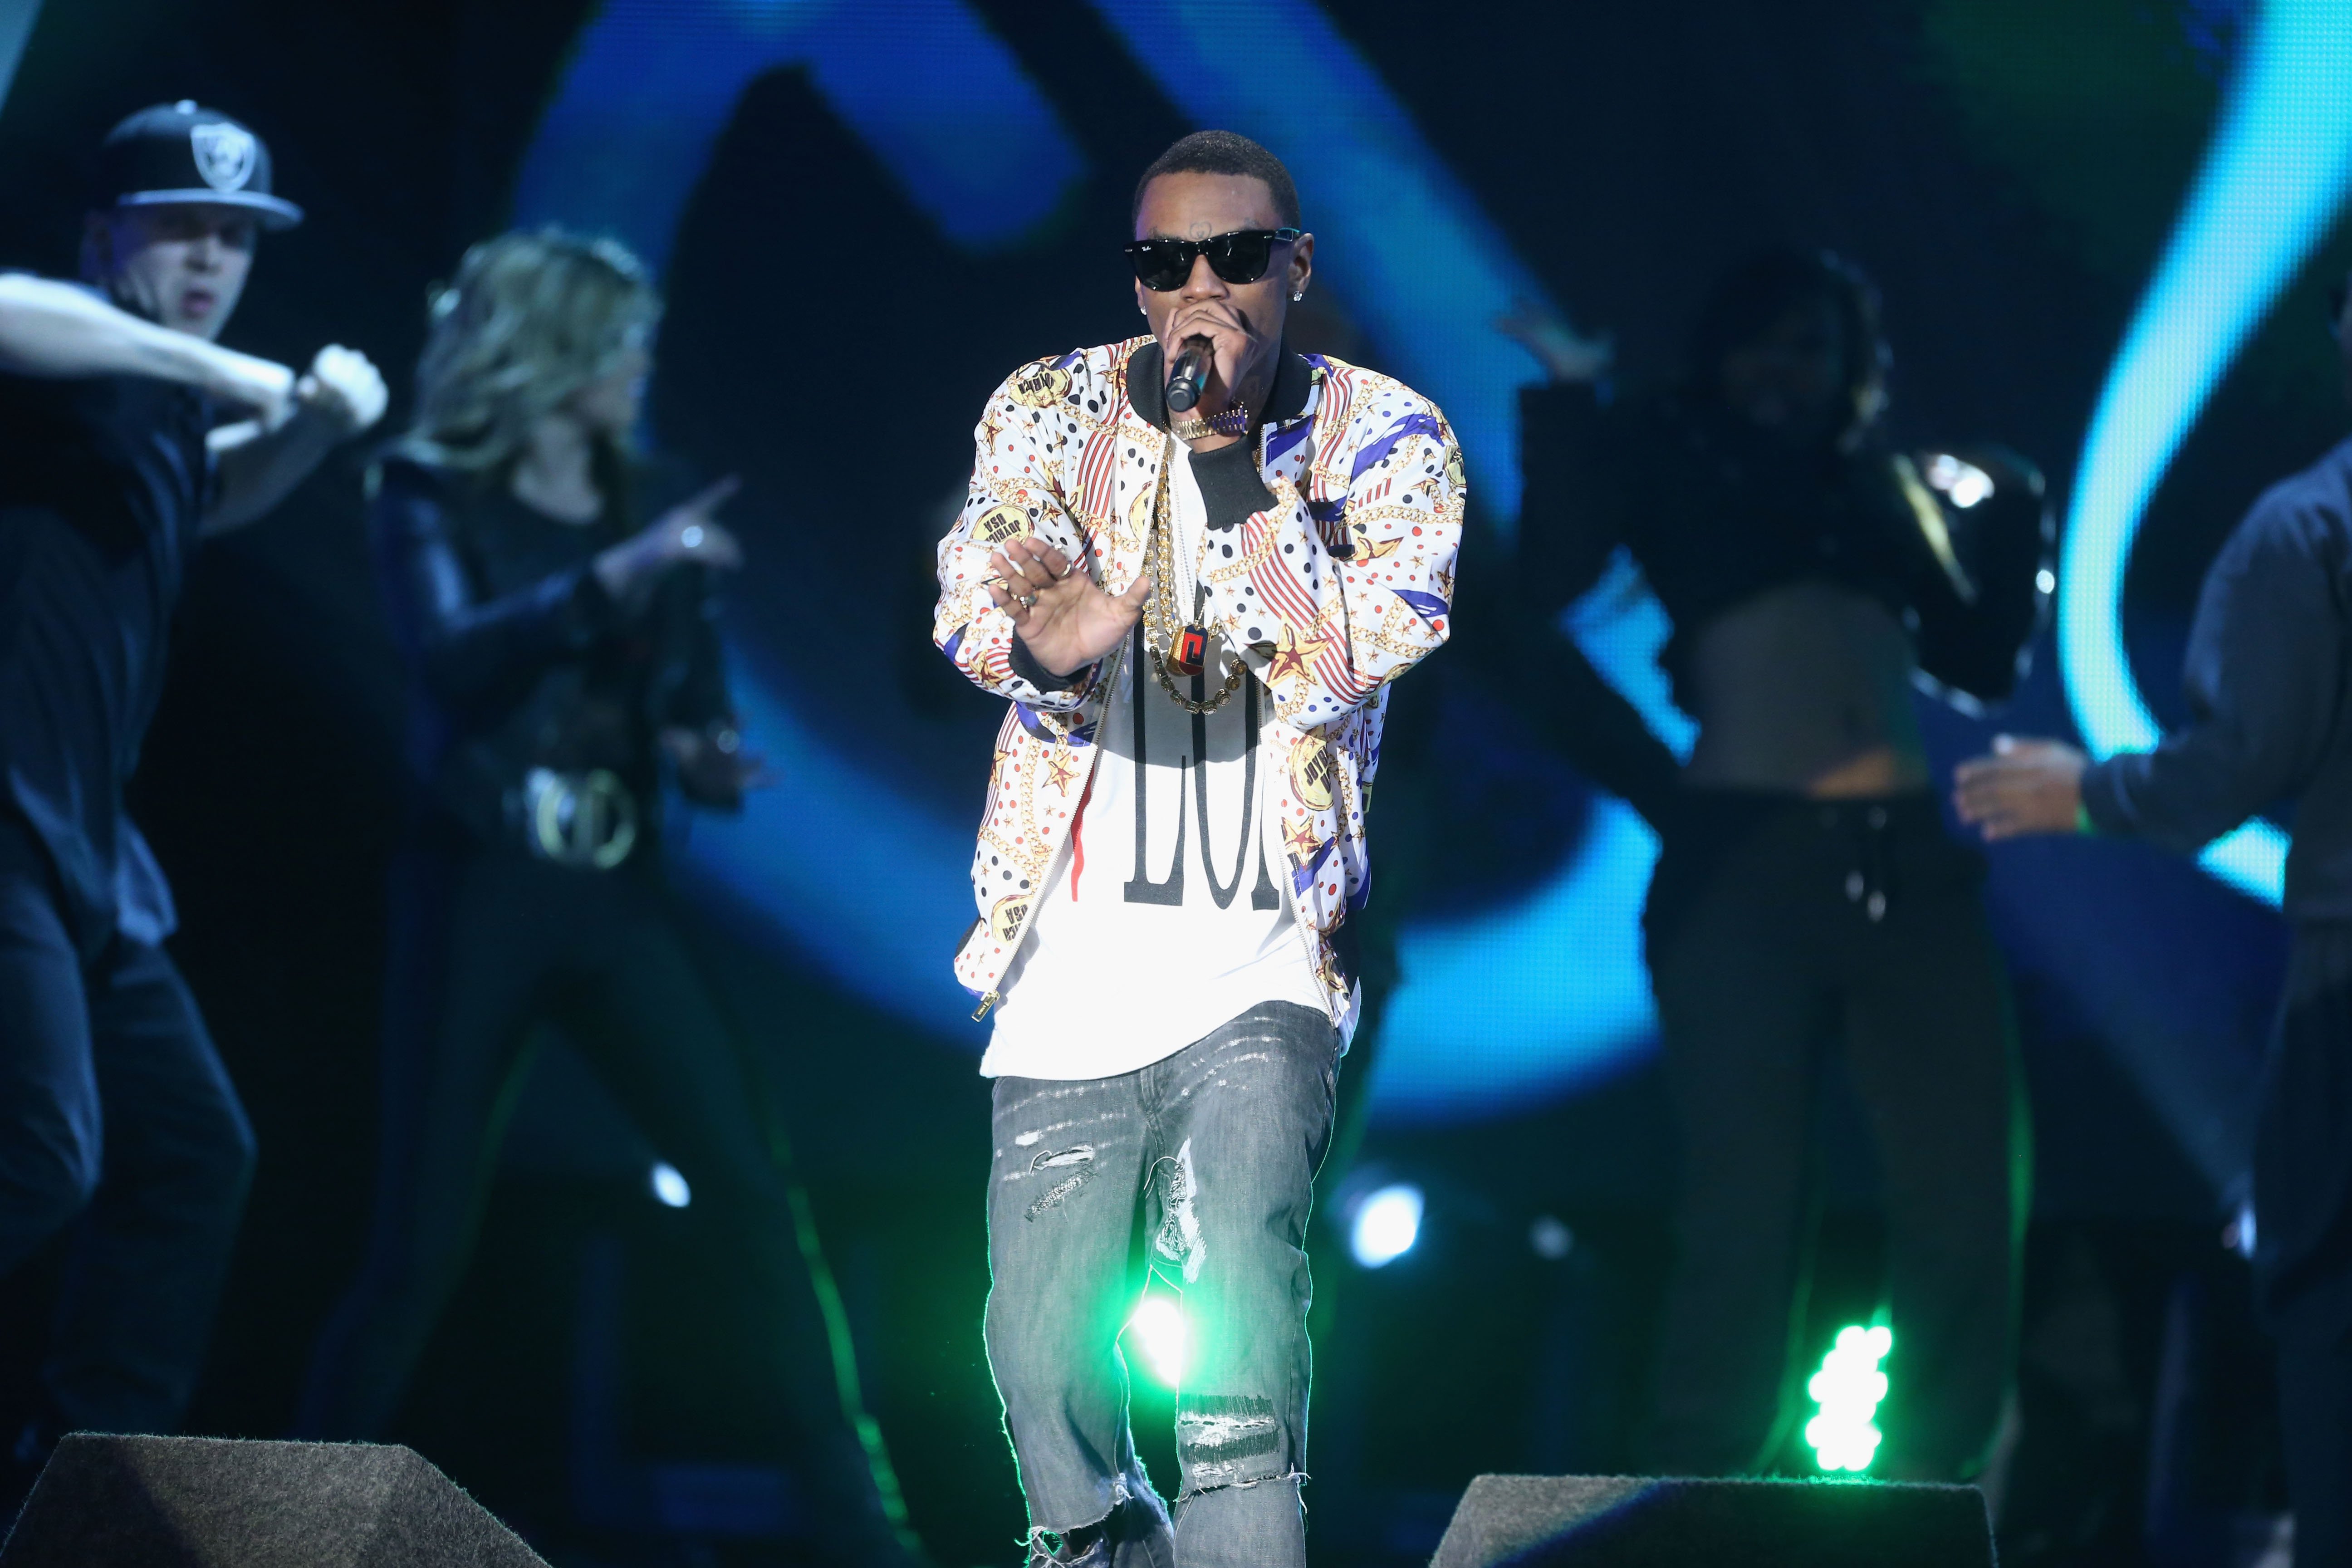 Soulja Boy performs onstage at the 3rd Annual Streamy Awards at Hollywood Palladium on February 17, 2013 in Hollywood, California. 